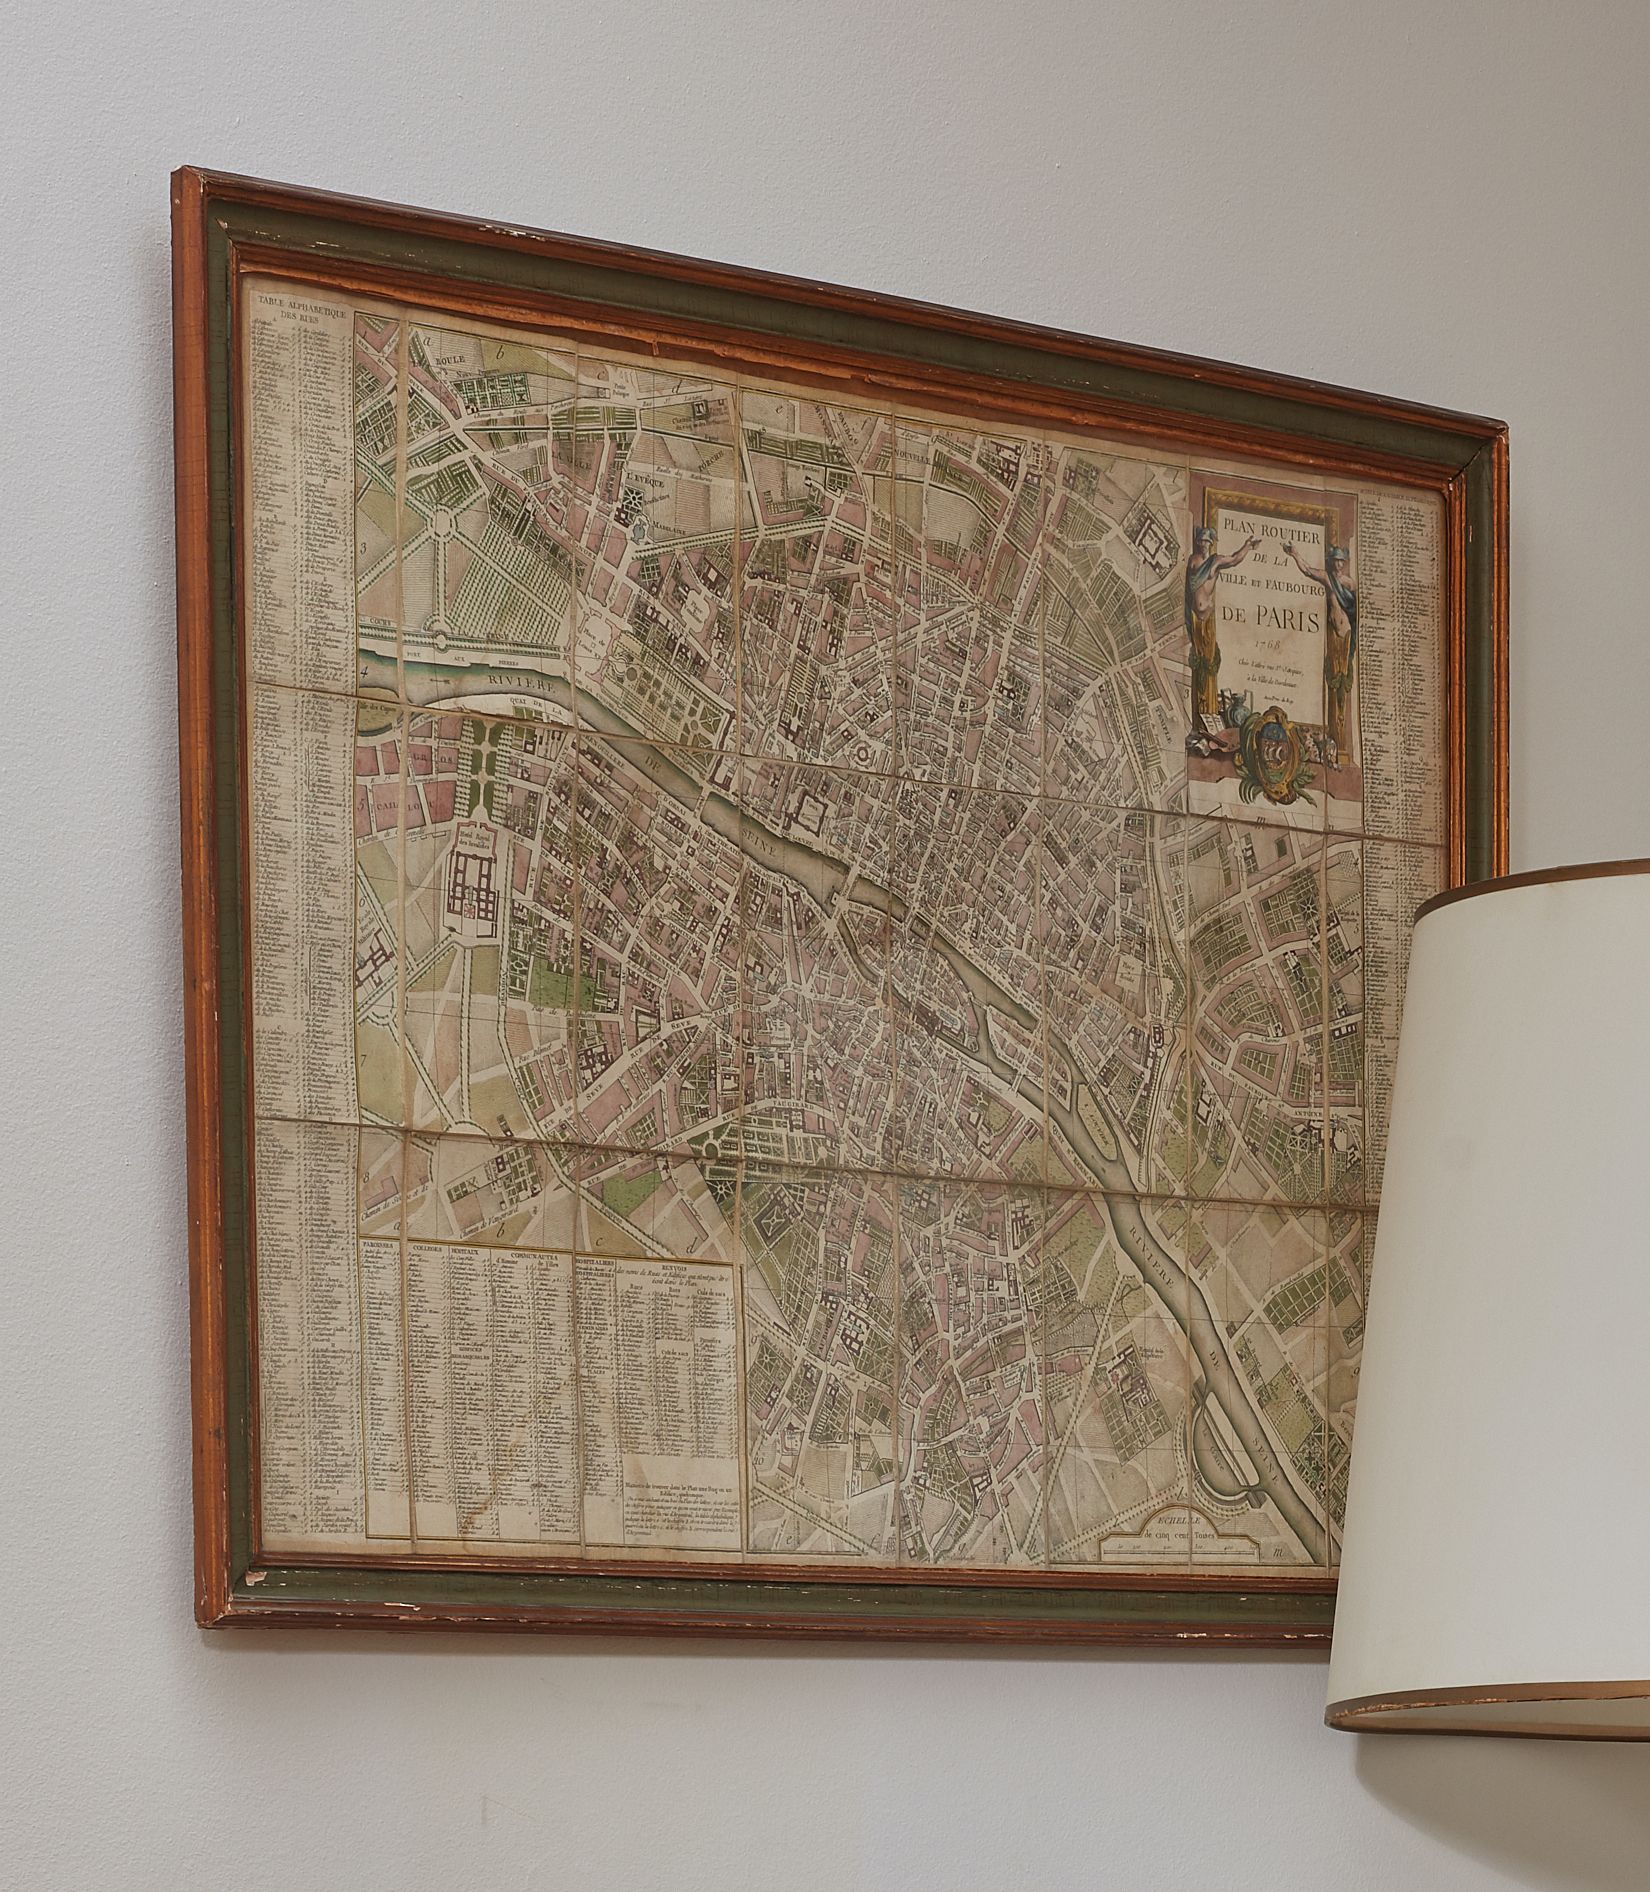 Null Road map of the city and suburbs of Paris 1768
55 x 77 cm